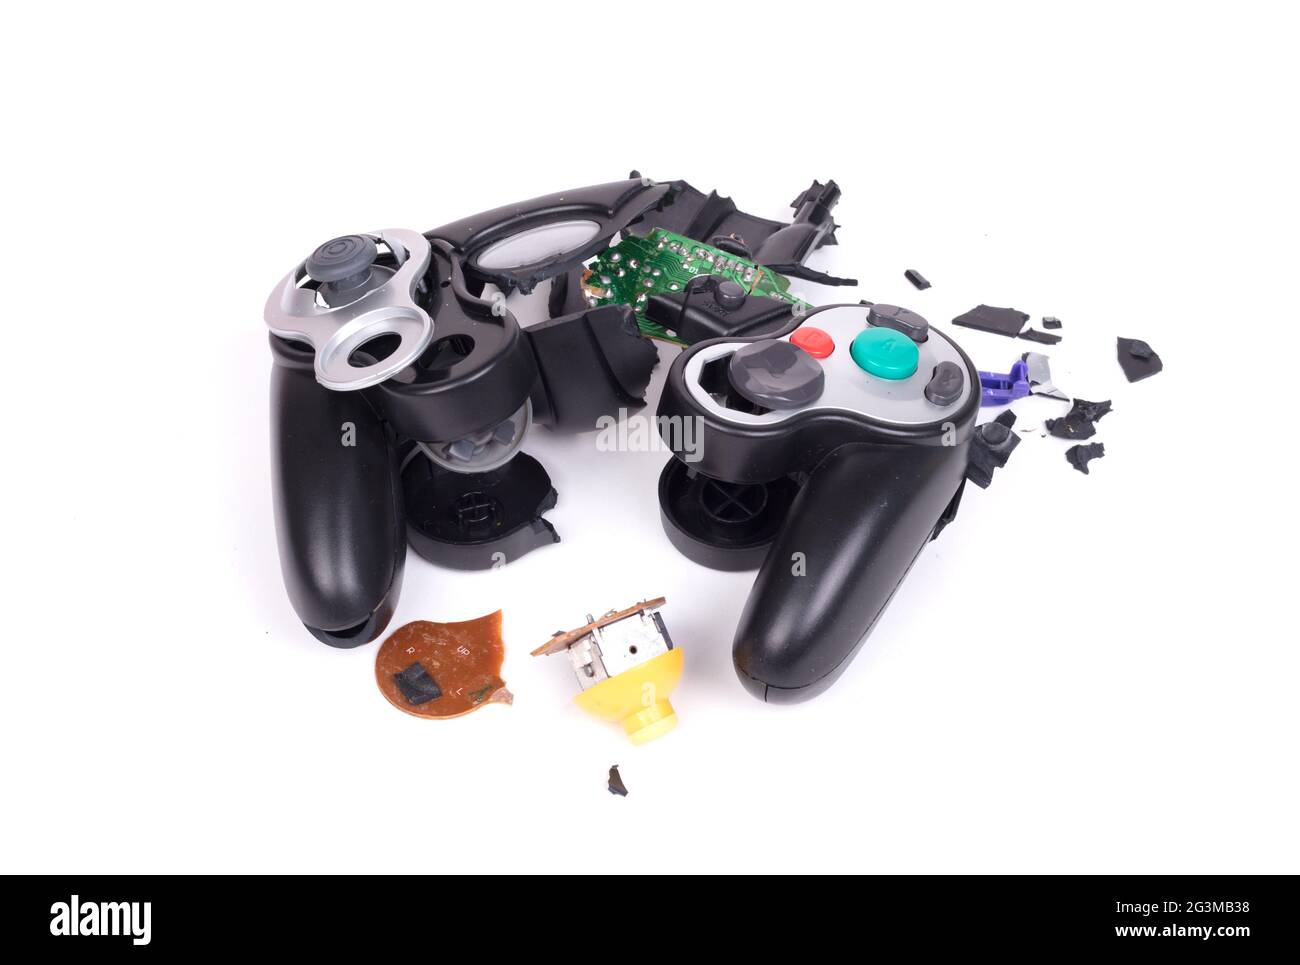 Broken video game controller on white background Stock Photo - Alamy